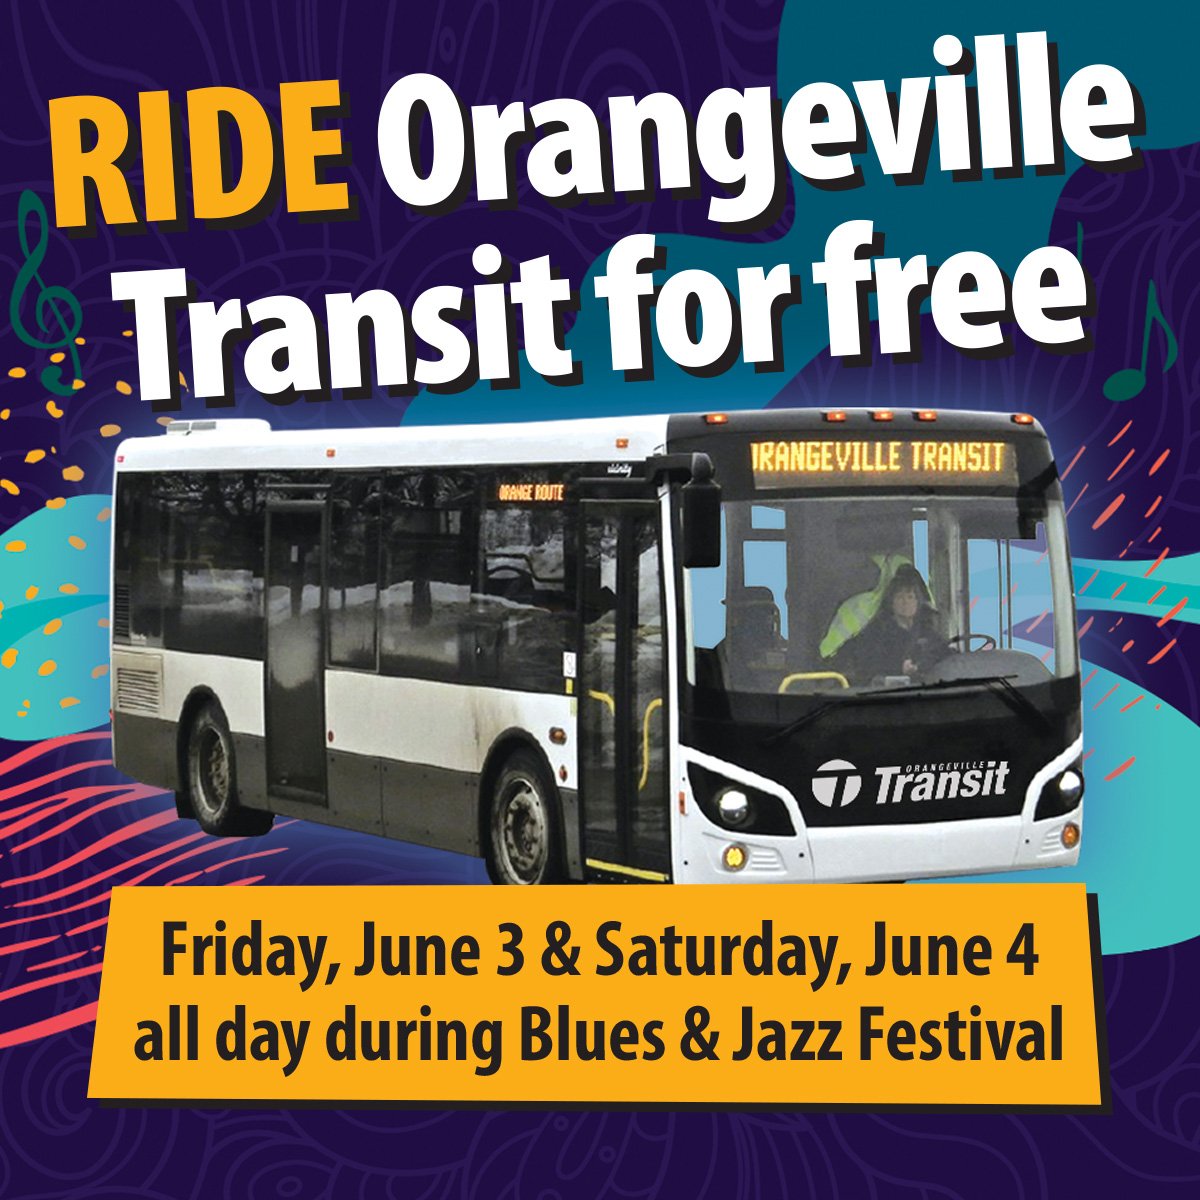 Photo of bus with text about free transit on Friday and Saturday during the Blues and Jazz Festival